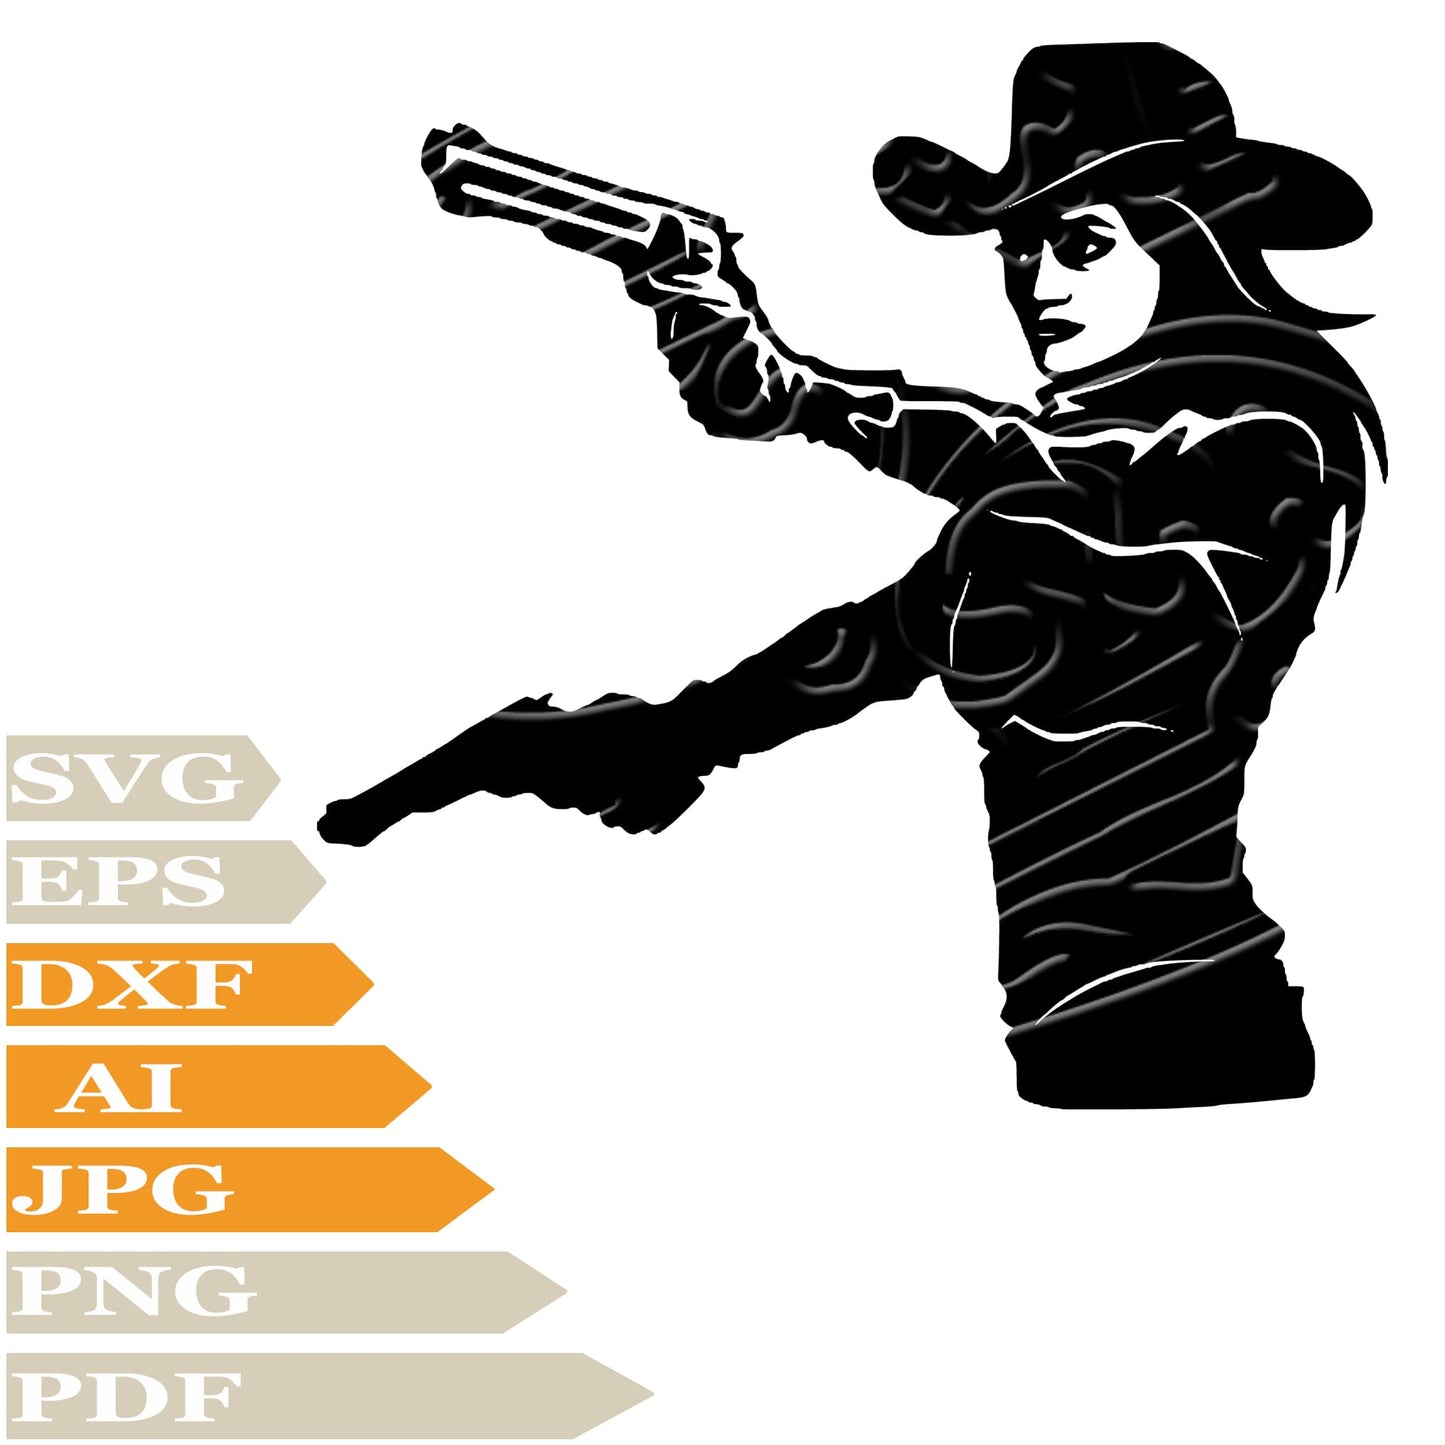 Girl, Girl with Gun Svg File, Image Cut, Png, For Tattoo, Silhouette, Digital Vector Download, Cut File, Clipart, For Cricut